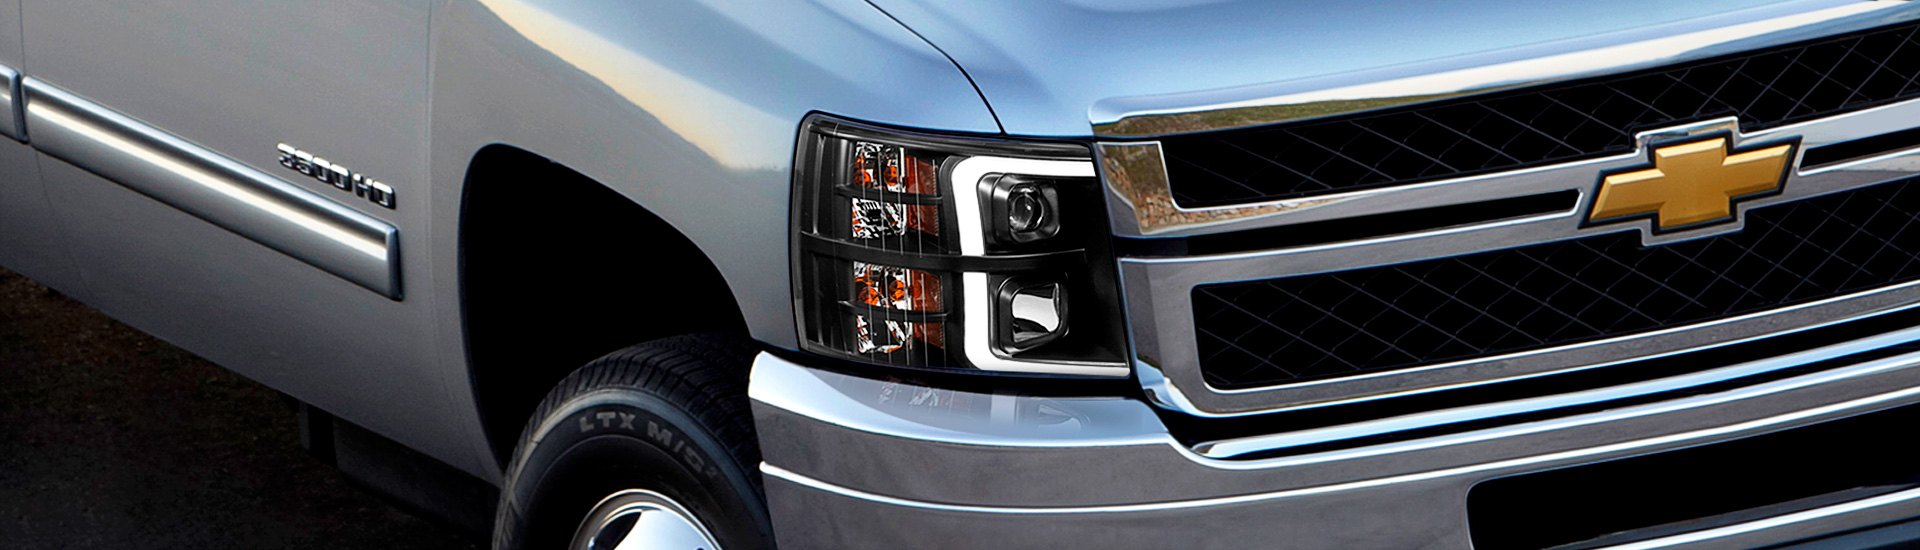 Anzo Launches New Lineup of Switchback LED U-Bar Headlights for Chevy Silverado